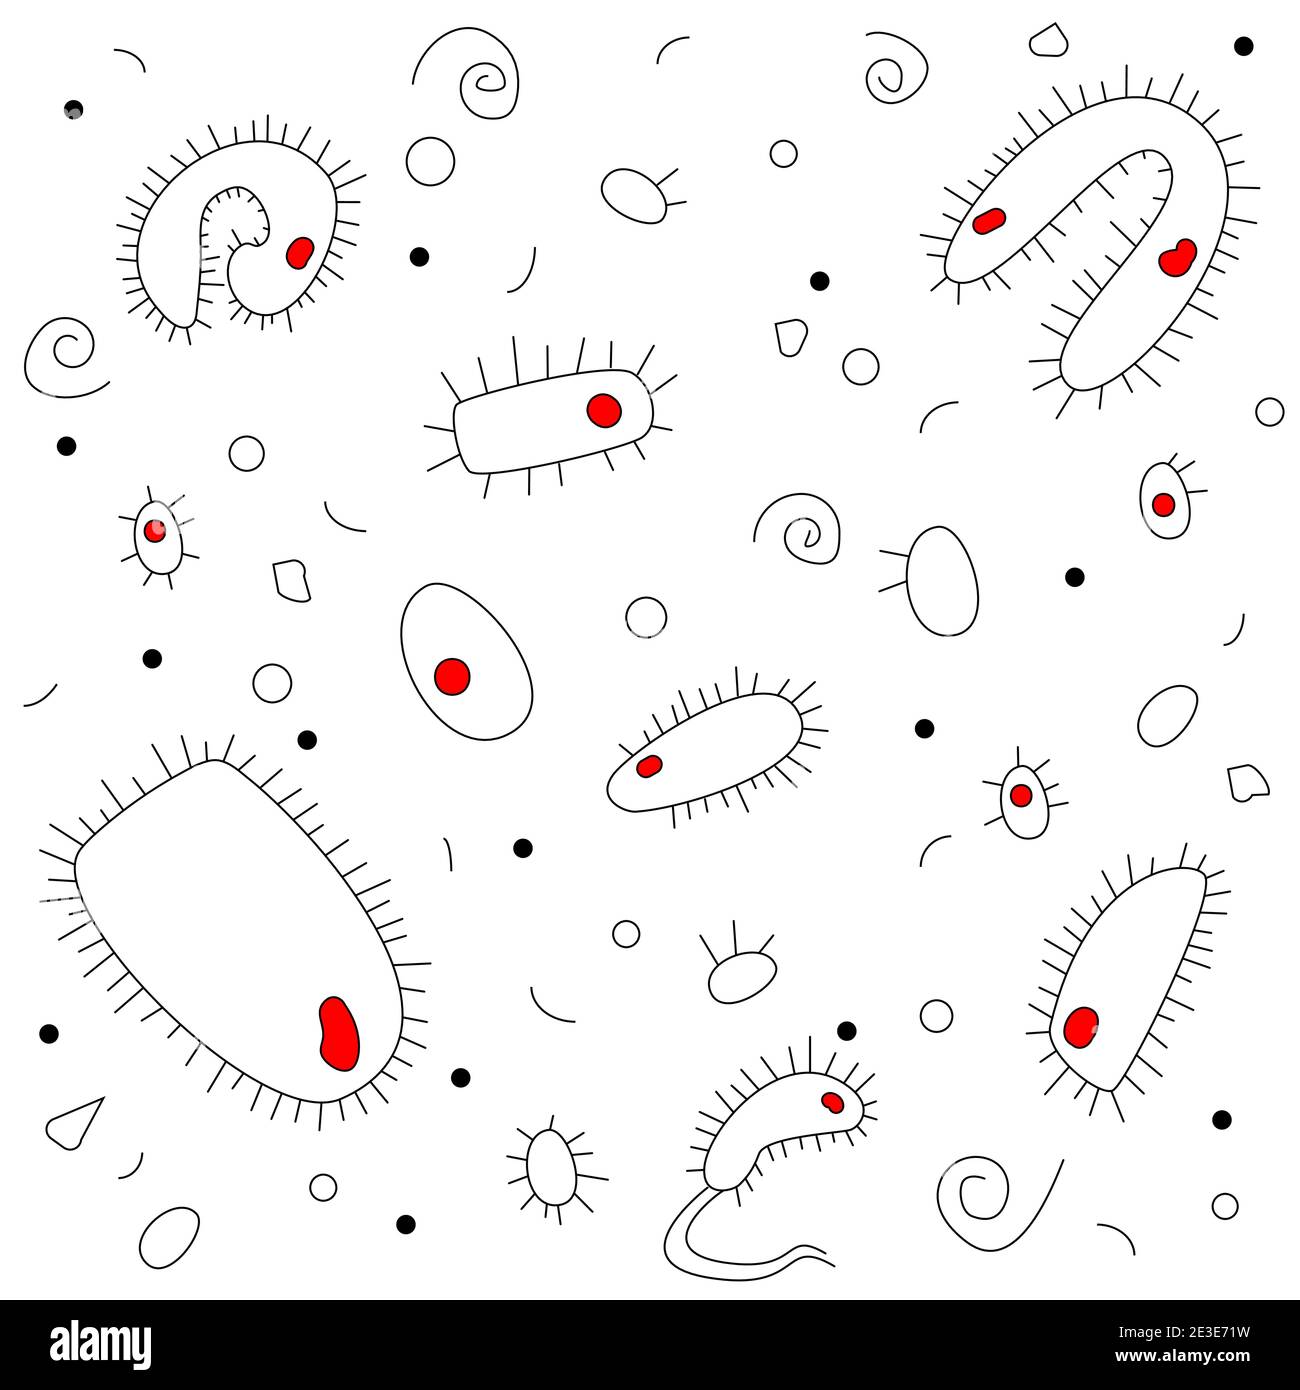 Doodle style, handdrawn drawing. Black and white bacteria with a red nucleus on a white background. Stock Vector